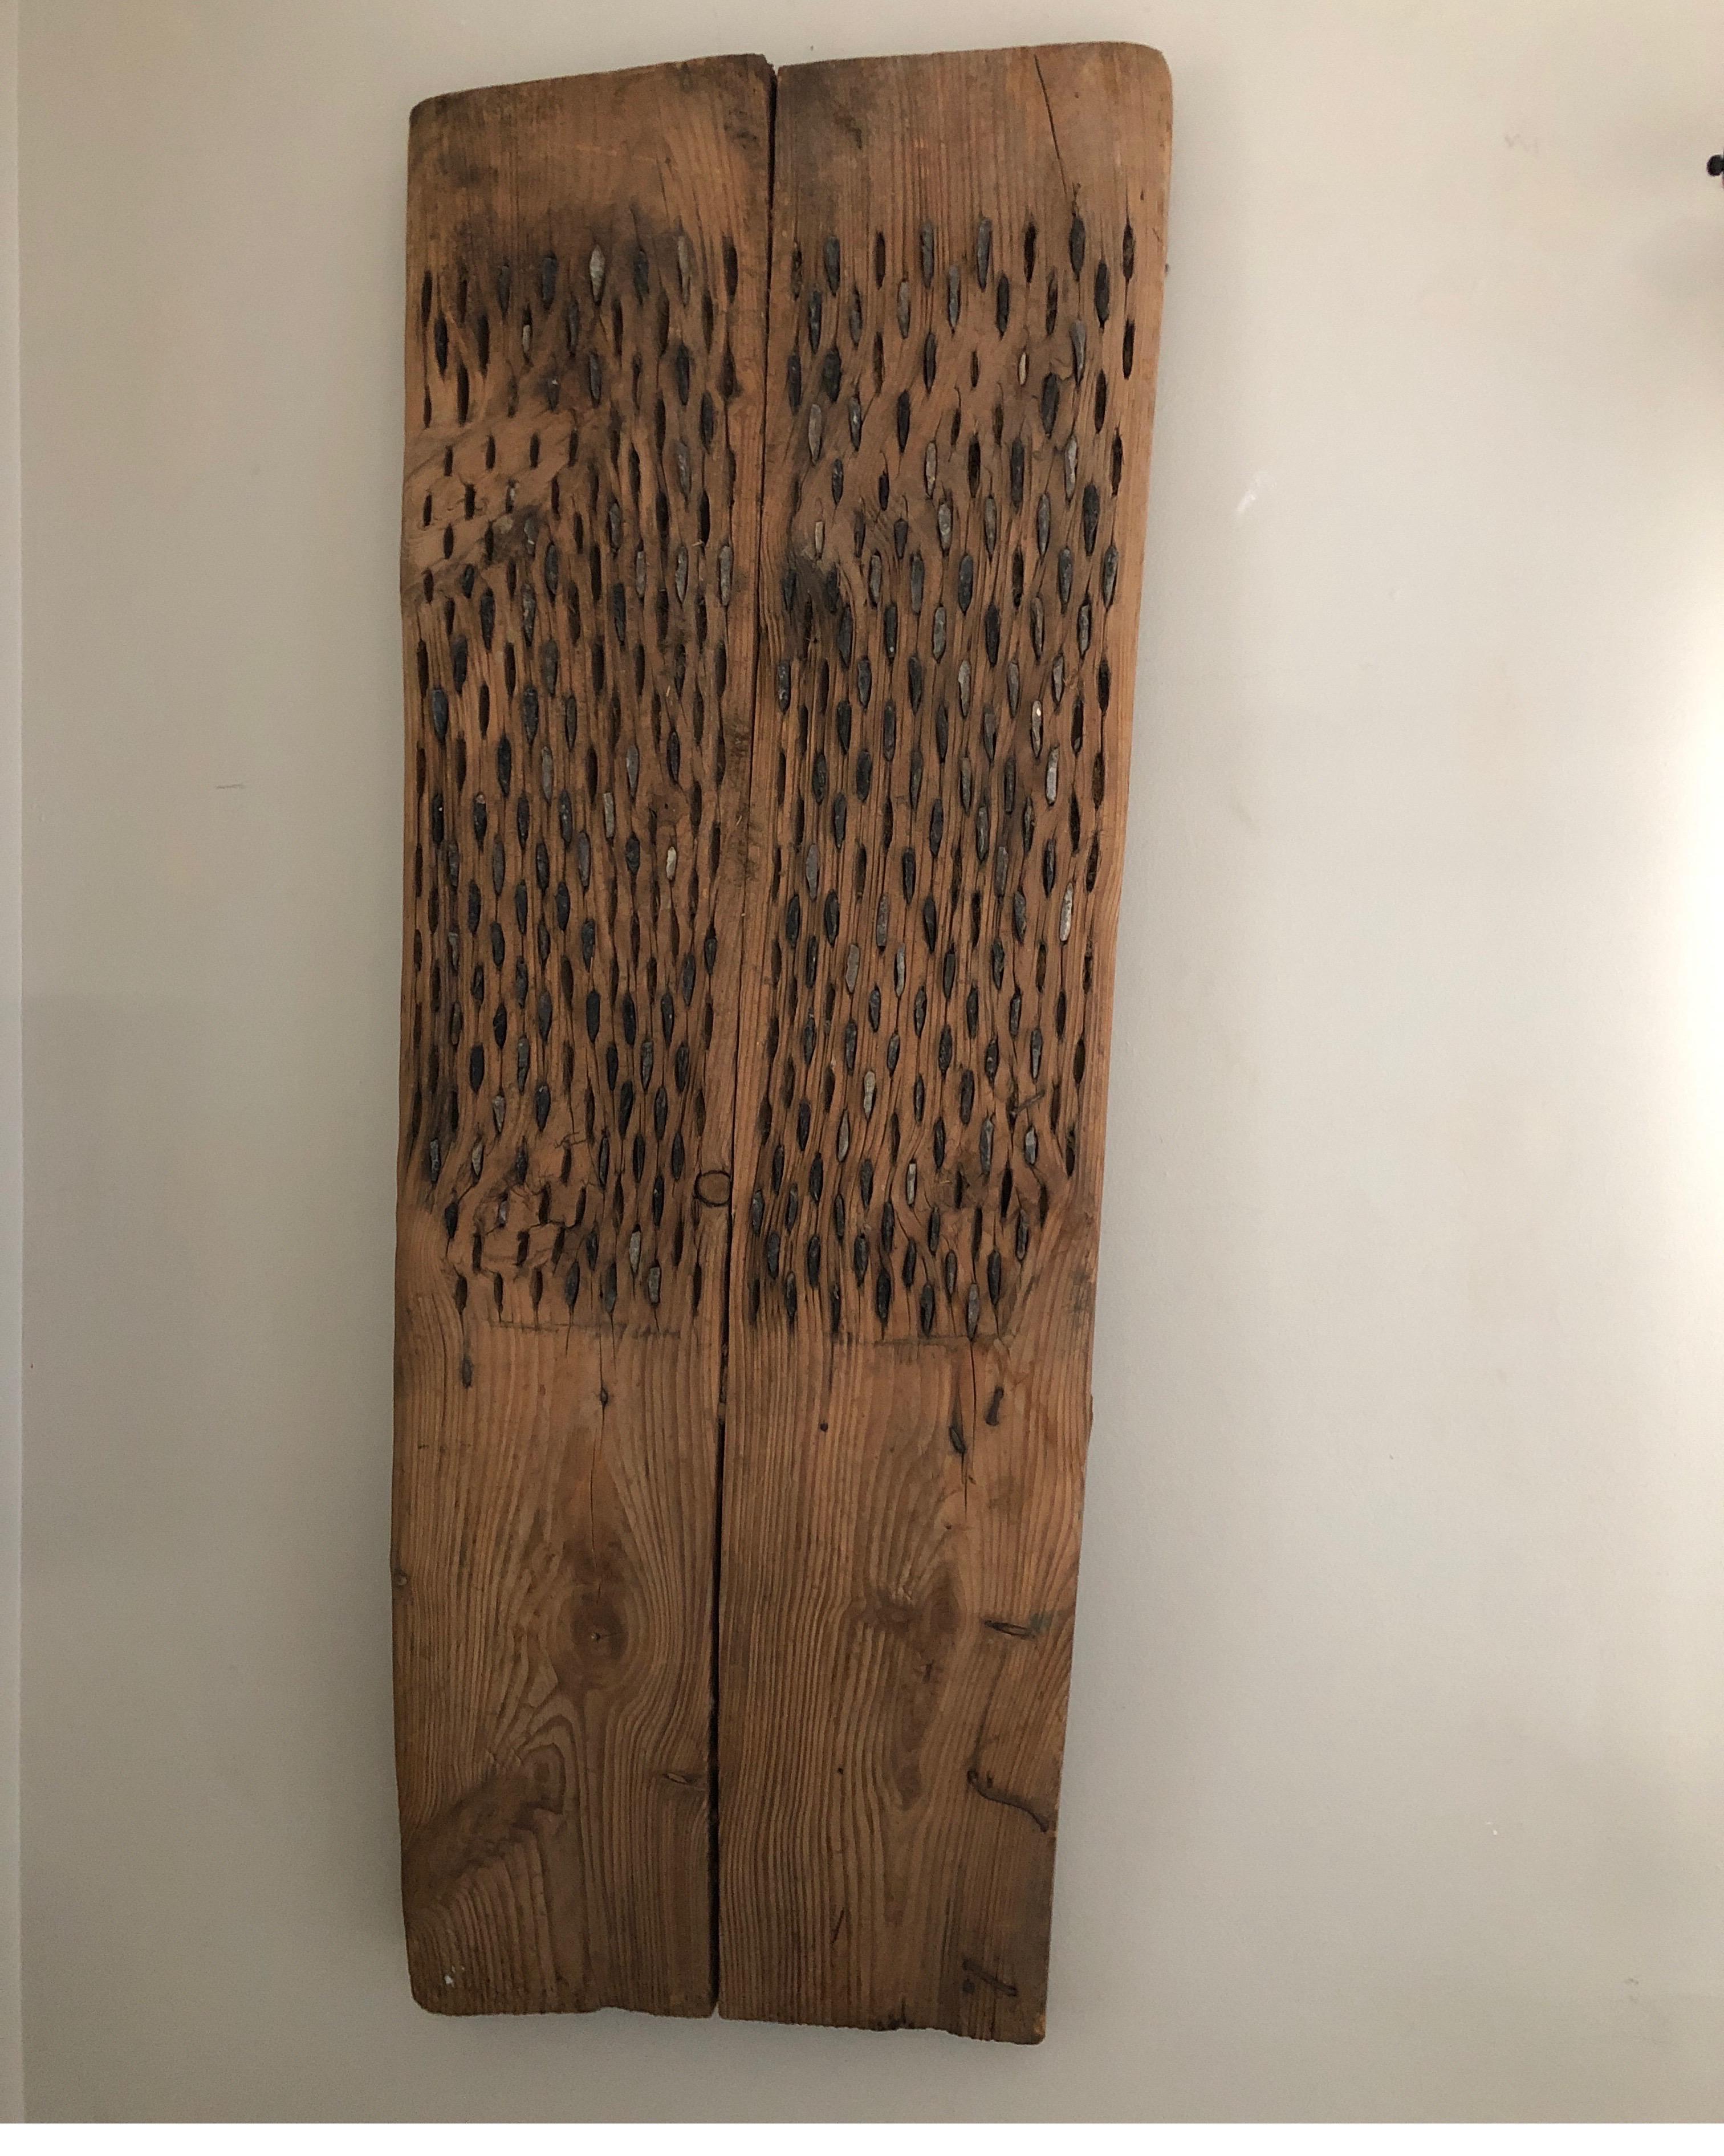 Tall primitive threshing board.
Measures 62.5 H x 25 at top 20 D at bottom x 5 inch D
Two pieces of wood along the back. One near the top and one near the bottom to assist in hanging in a wall.
Unique one of a kind handmade piece used by Turkish